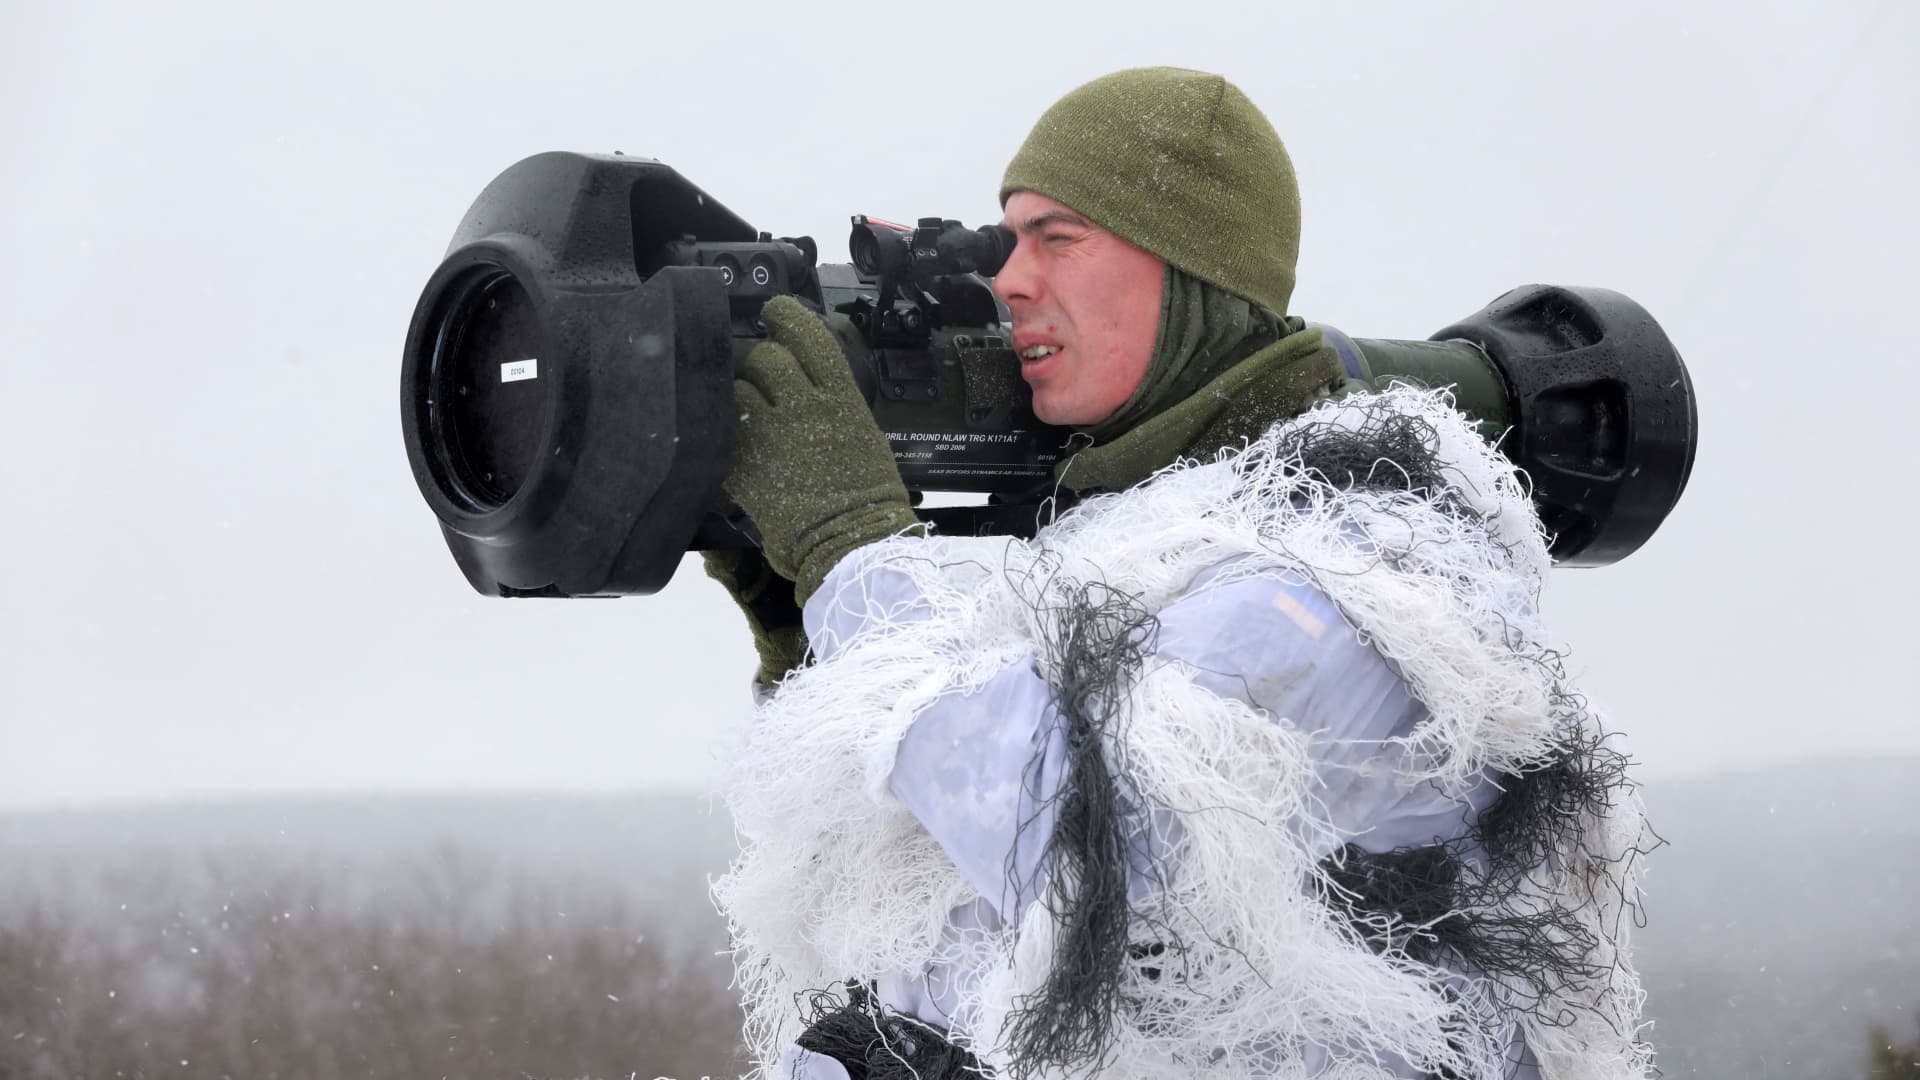 A Ukrainian Military Forces serviceman aims with a Next generation Light Anti-tank Weapon (NLAW) Swedish-British anti-aircraft missile launcher during a drill at the firing ground of the International Center for Peacekeeping and Security, near the western Ukrainian city of Lviv on January 28, 2022.